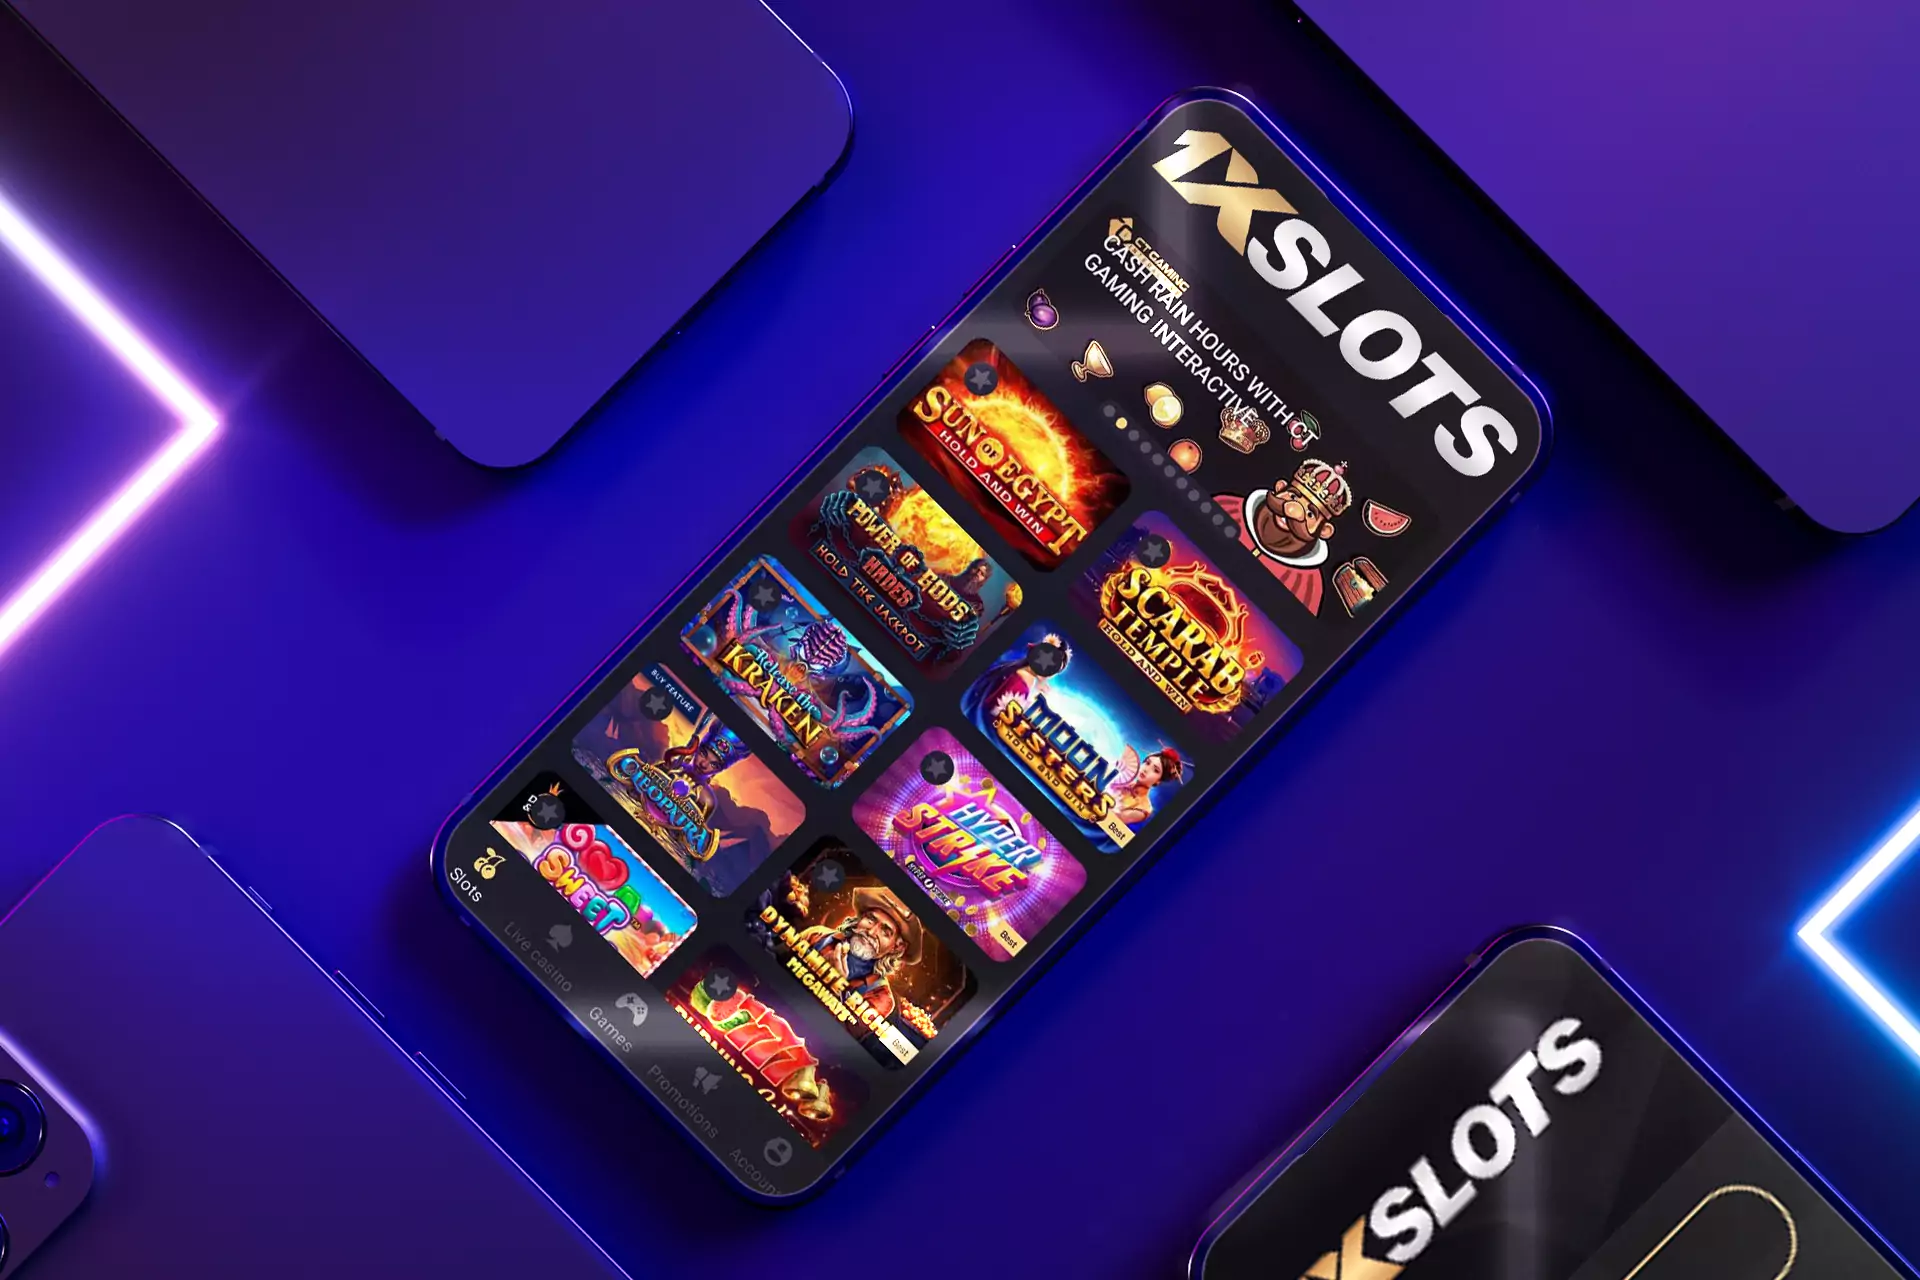 If you have an Android device, you can play casino games in the app.